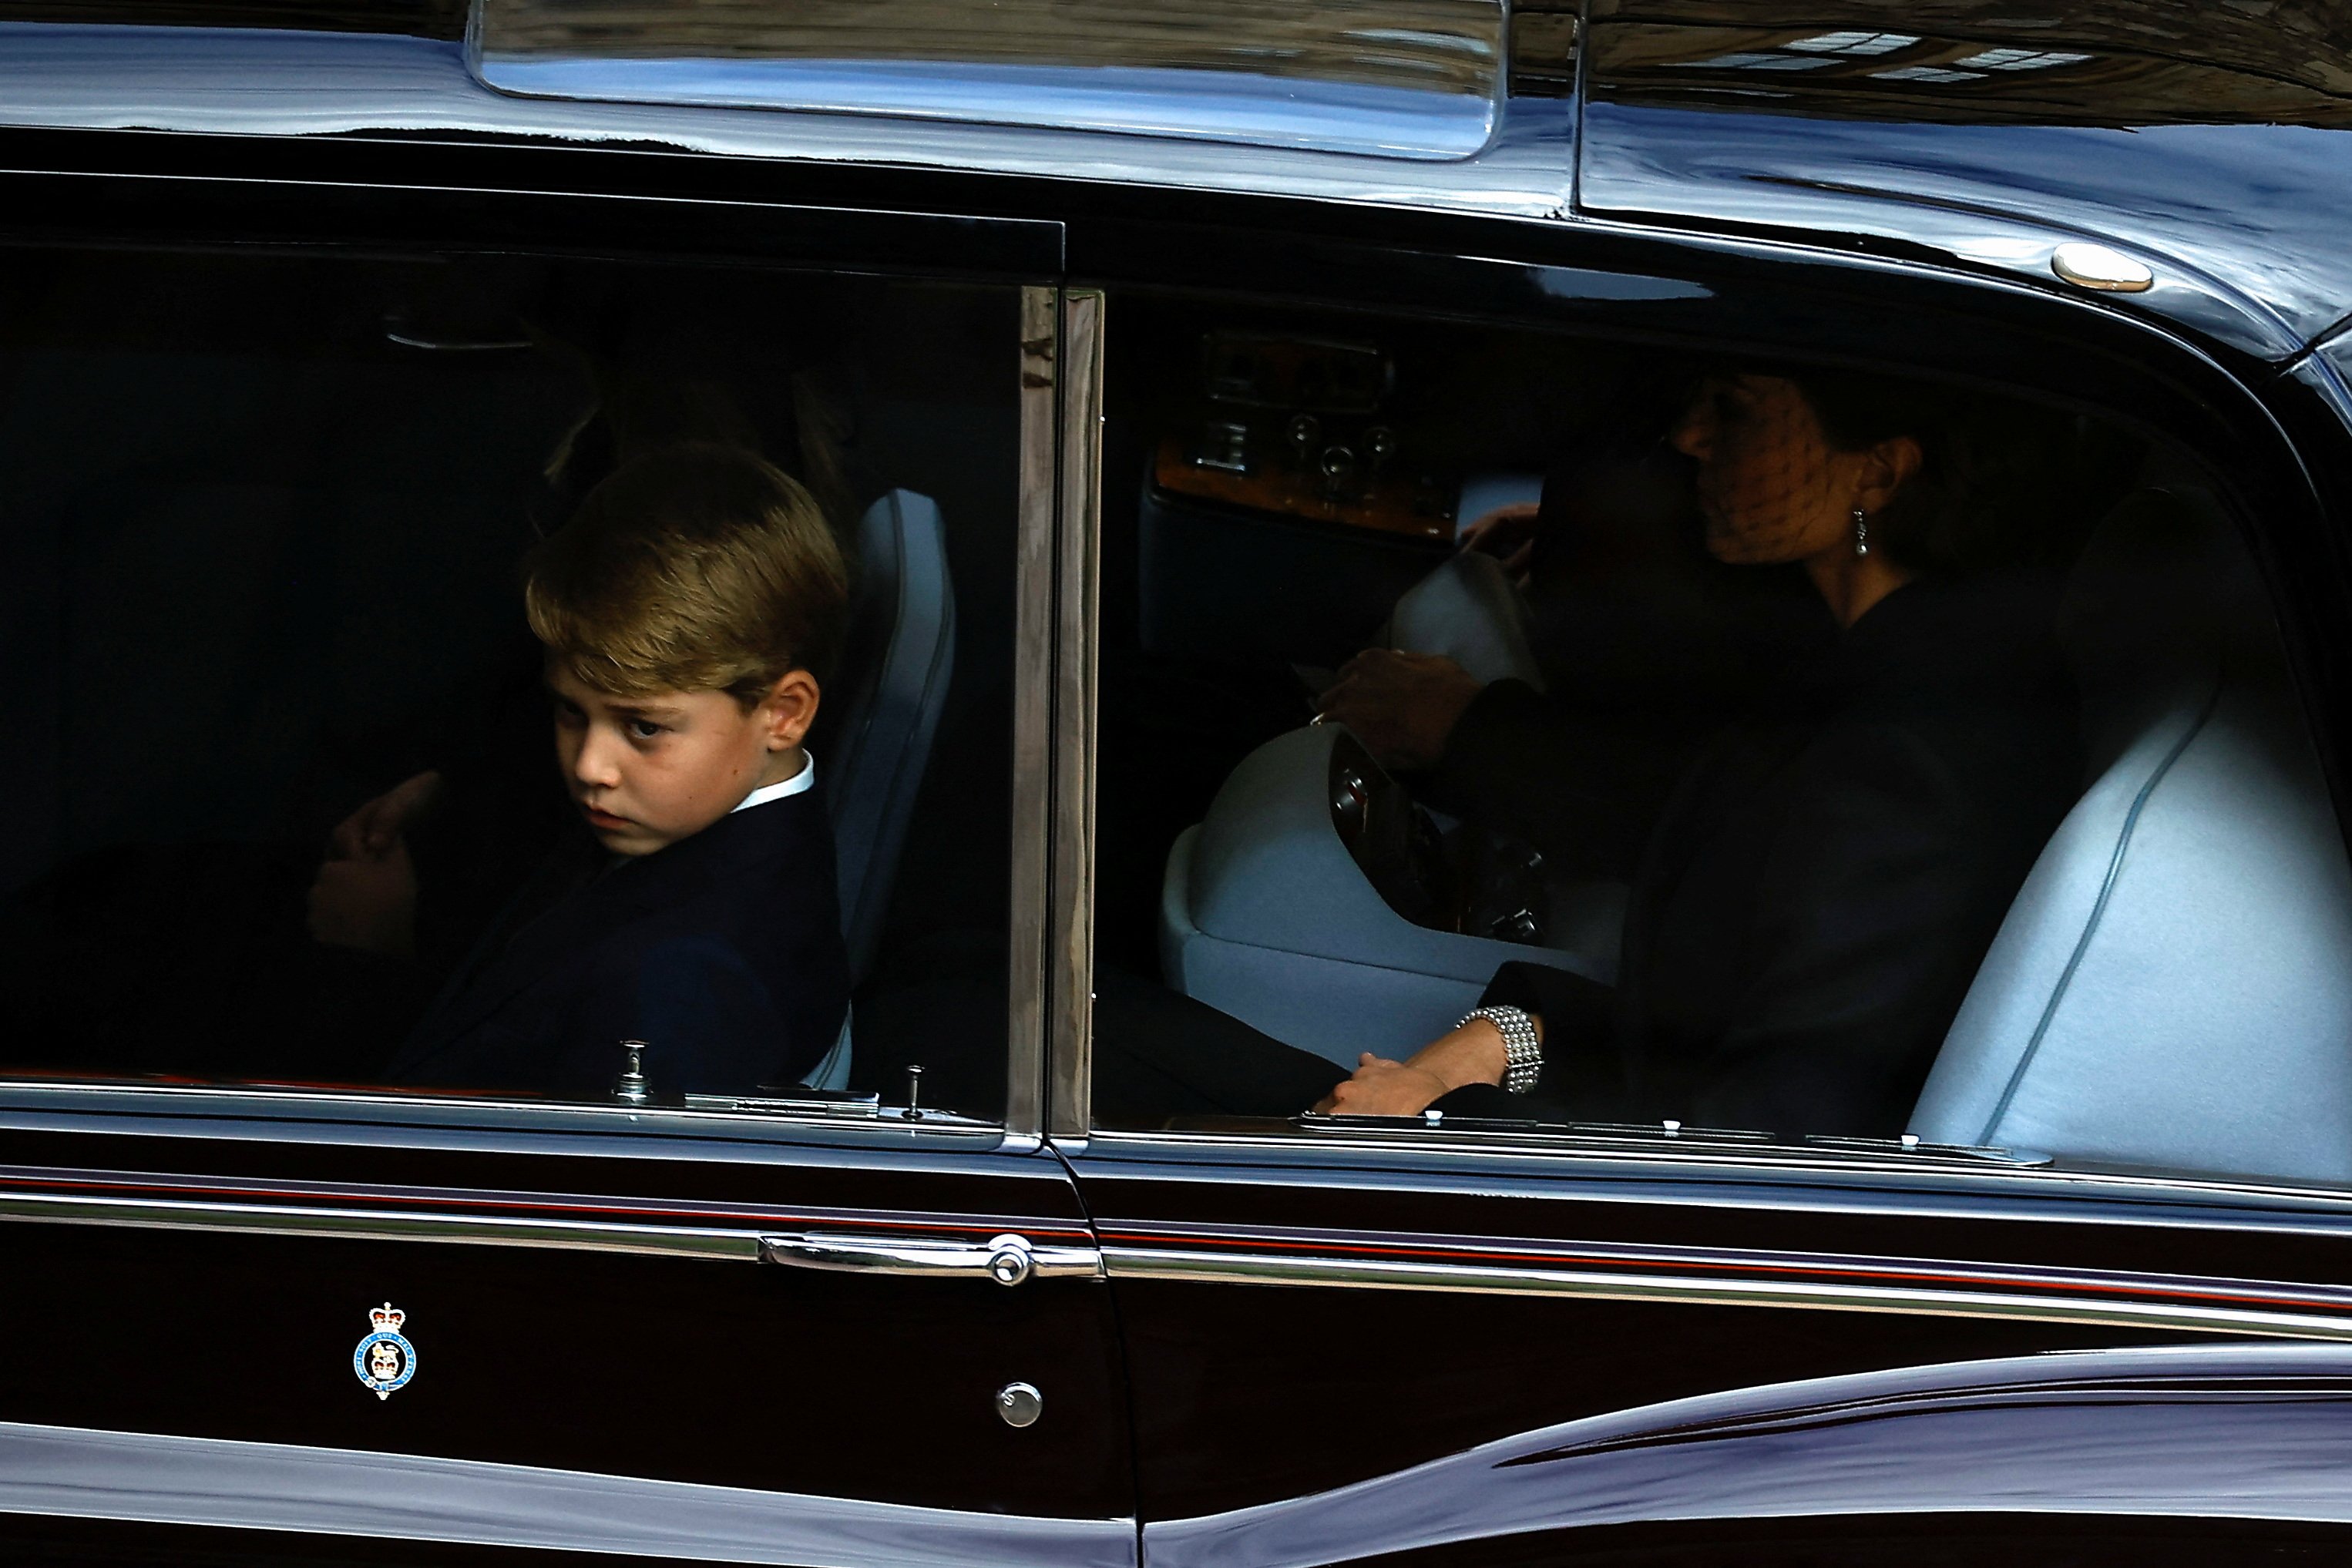 Prince George and Catherine, Princess of Wales sit in a car as it drives on the day of the state funeral and burial of Queen Elizabeth, at Windsor Castle, on September 19, 2022 in Windsor, England. | Source: Getty Images